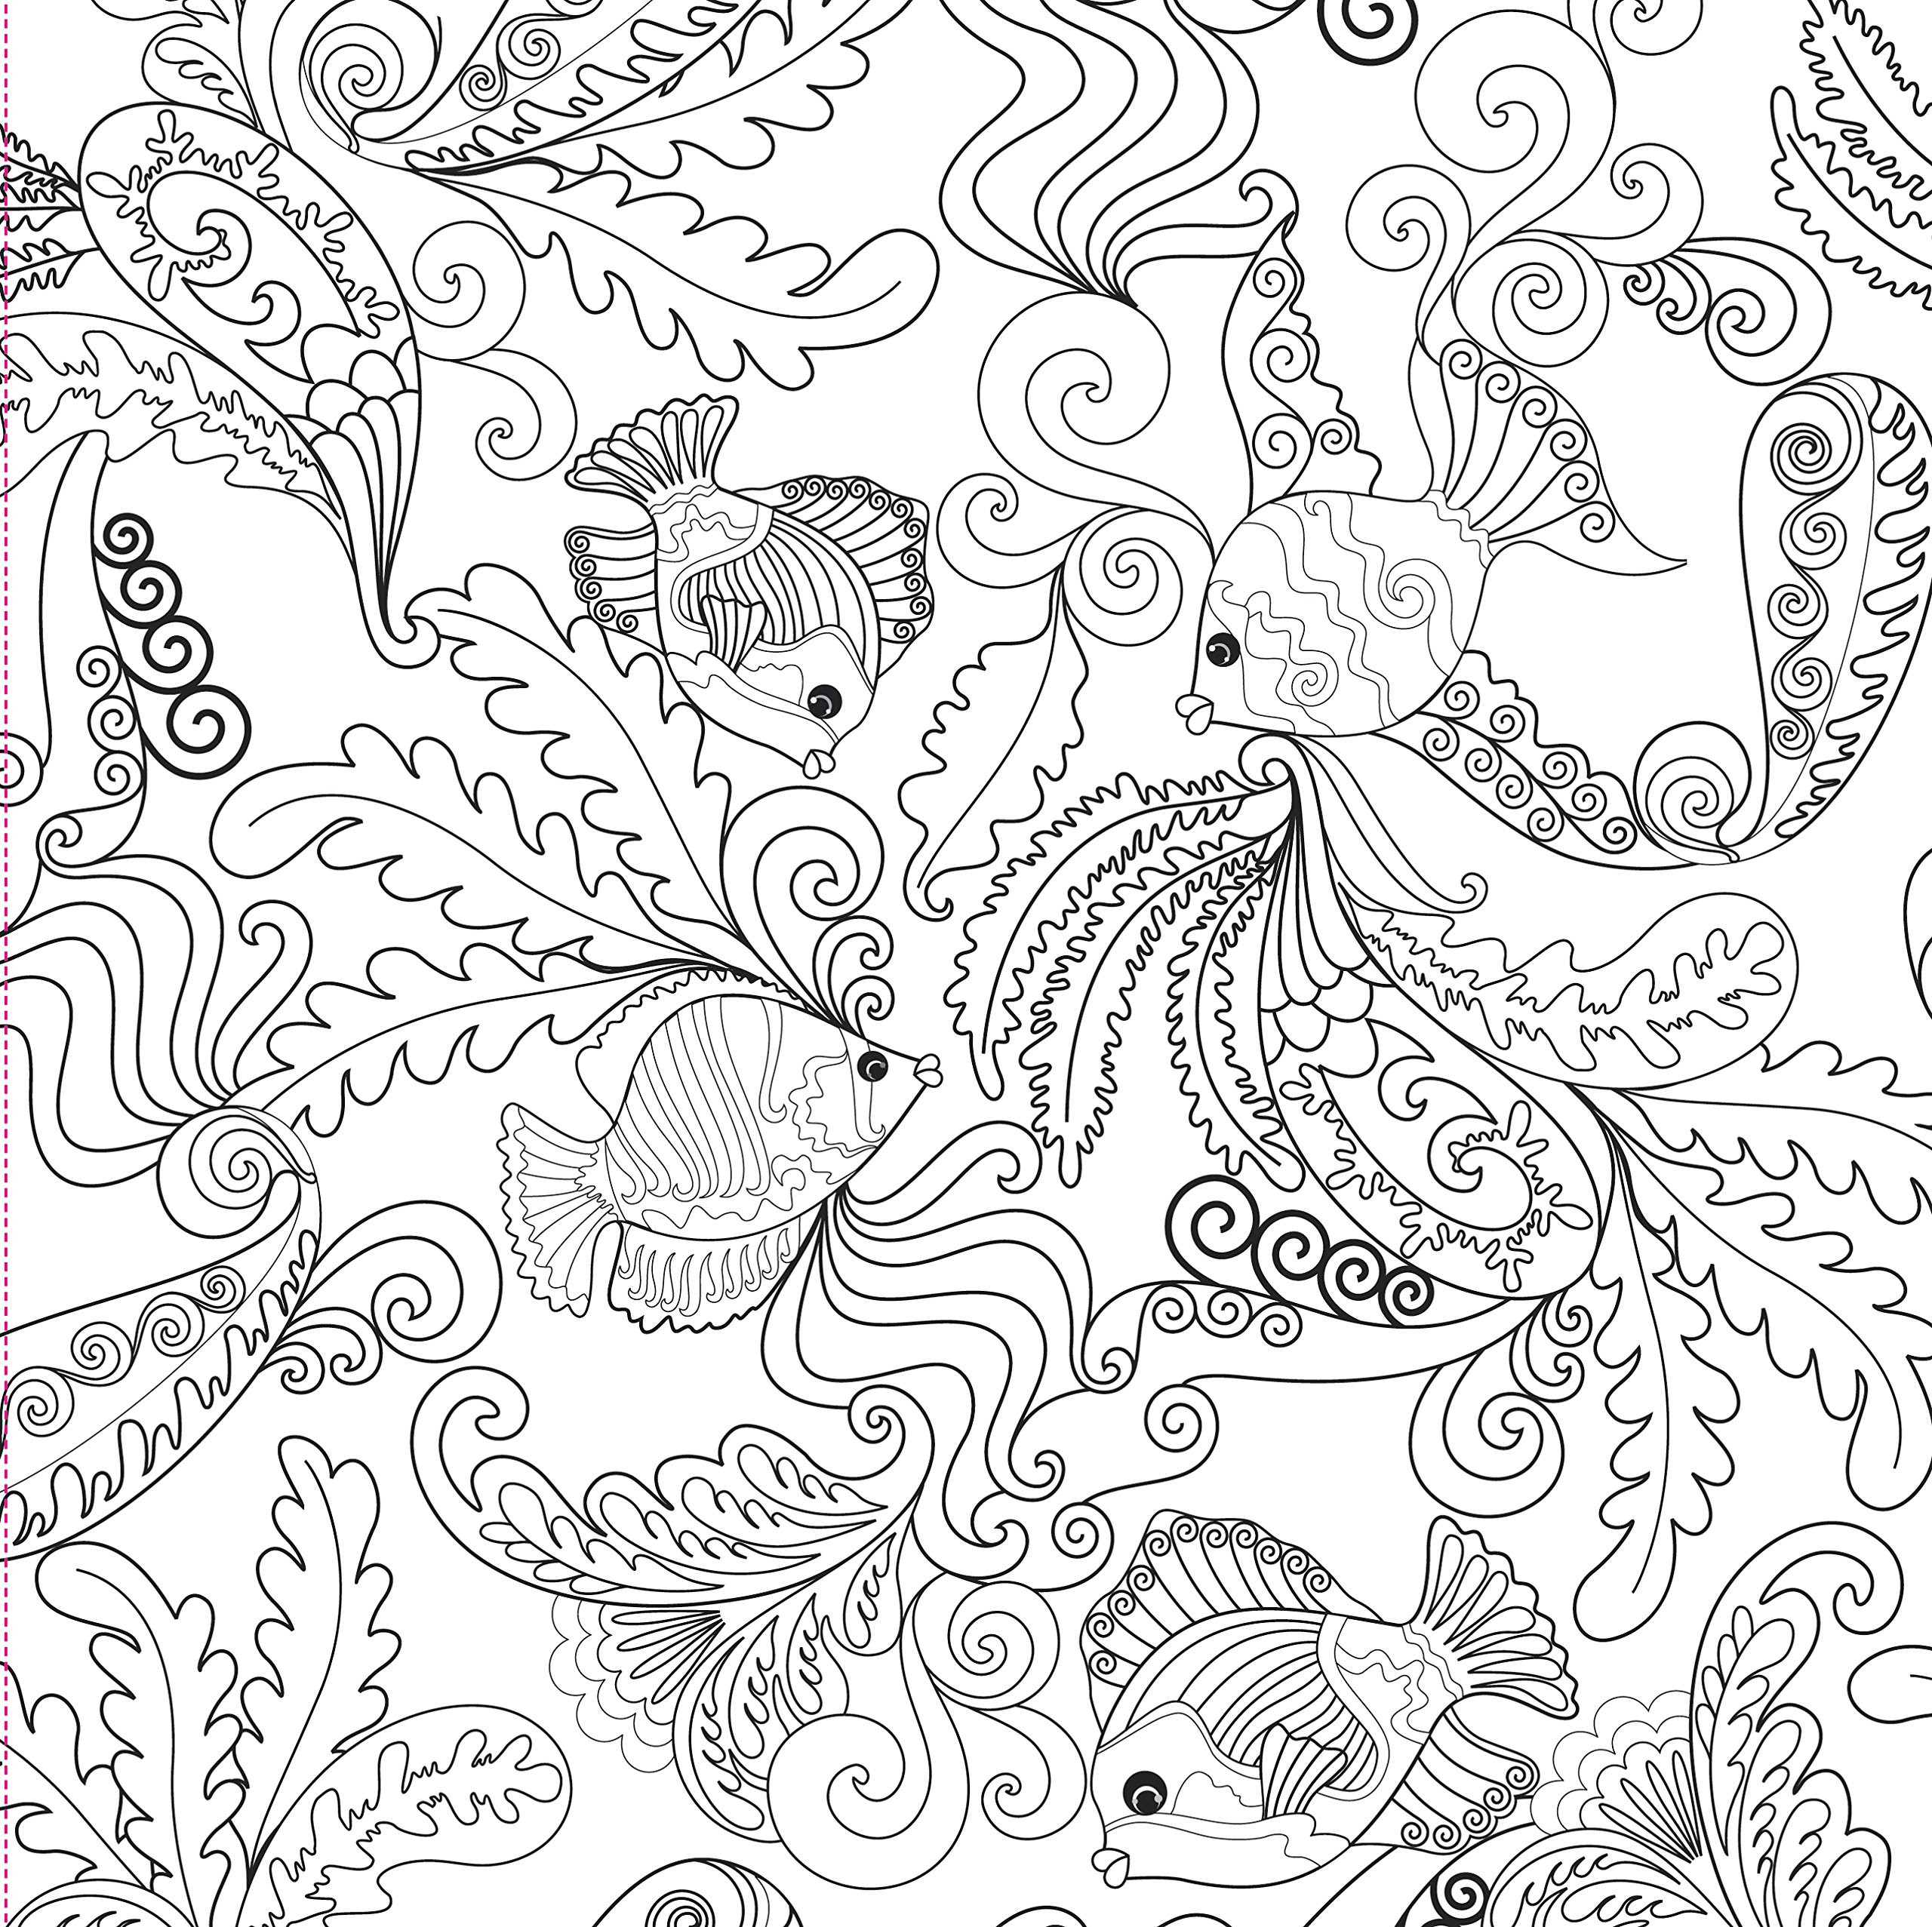 Sea Animals Coloring Worksheets : Copyright 04/9/2017 flaviarr